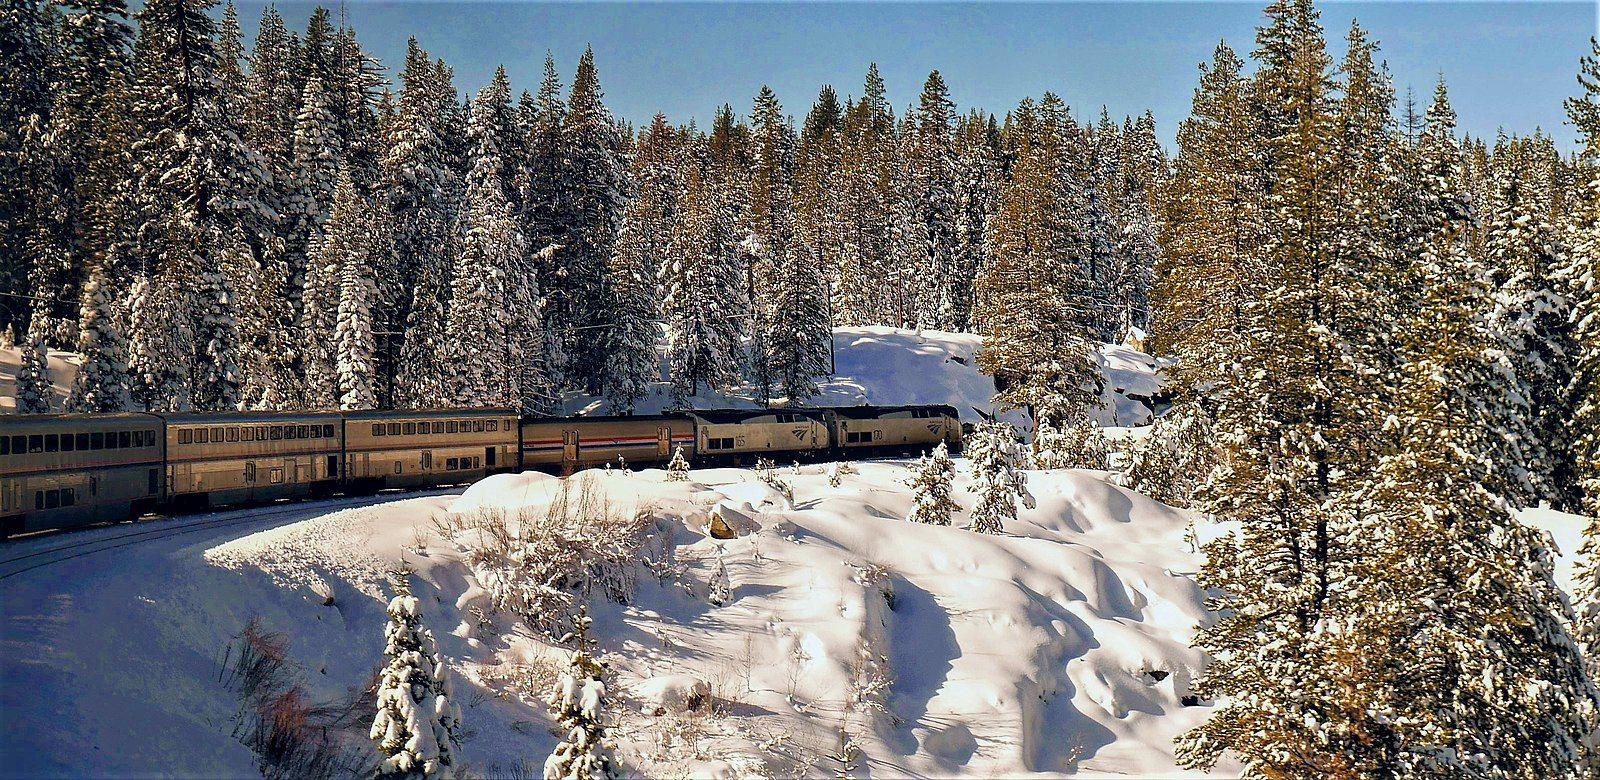 <p>If cross-country train trips are your thing, add the California Zephyr ride to your bucket list. This train journey, operated by Amtrak, runs from Chicago, Illinois, to Emeryville (San Francisco), California, and takes more than 50 hours to complete.</p><p>The itinerary also includes stops along the way in Iowa, Nebraska, Colorado, Utah, and Nevada. It’s possible to create a customized itinerary for part of the journey, like jumping on in Denver, Colorado, and getting off in Reno, Nevada.</p><p>Many of the scenic highlights include mountain ranges like the Rocky Mountains and Sierra Nevadas. Near the end of your journey you’ll also be able to see the San Pablo Bay and Carquinez Strait.</p>